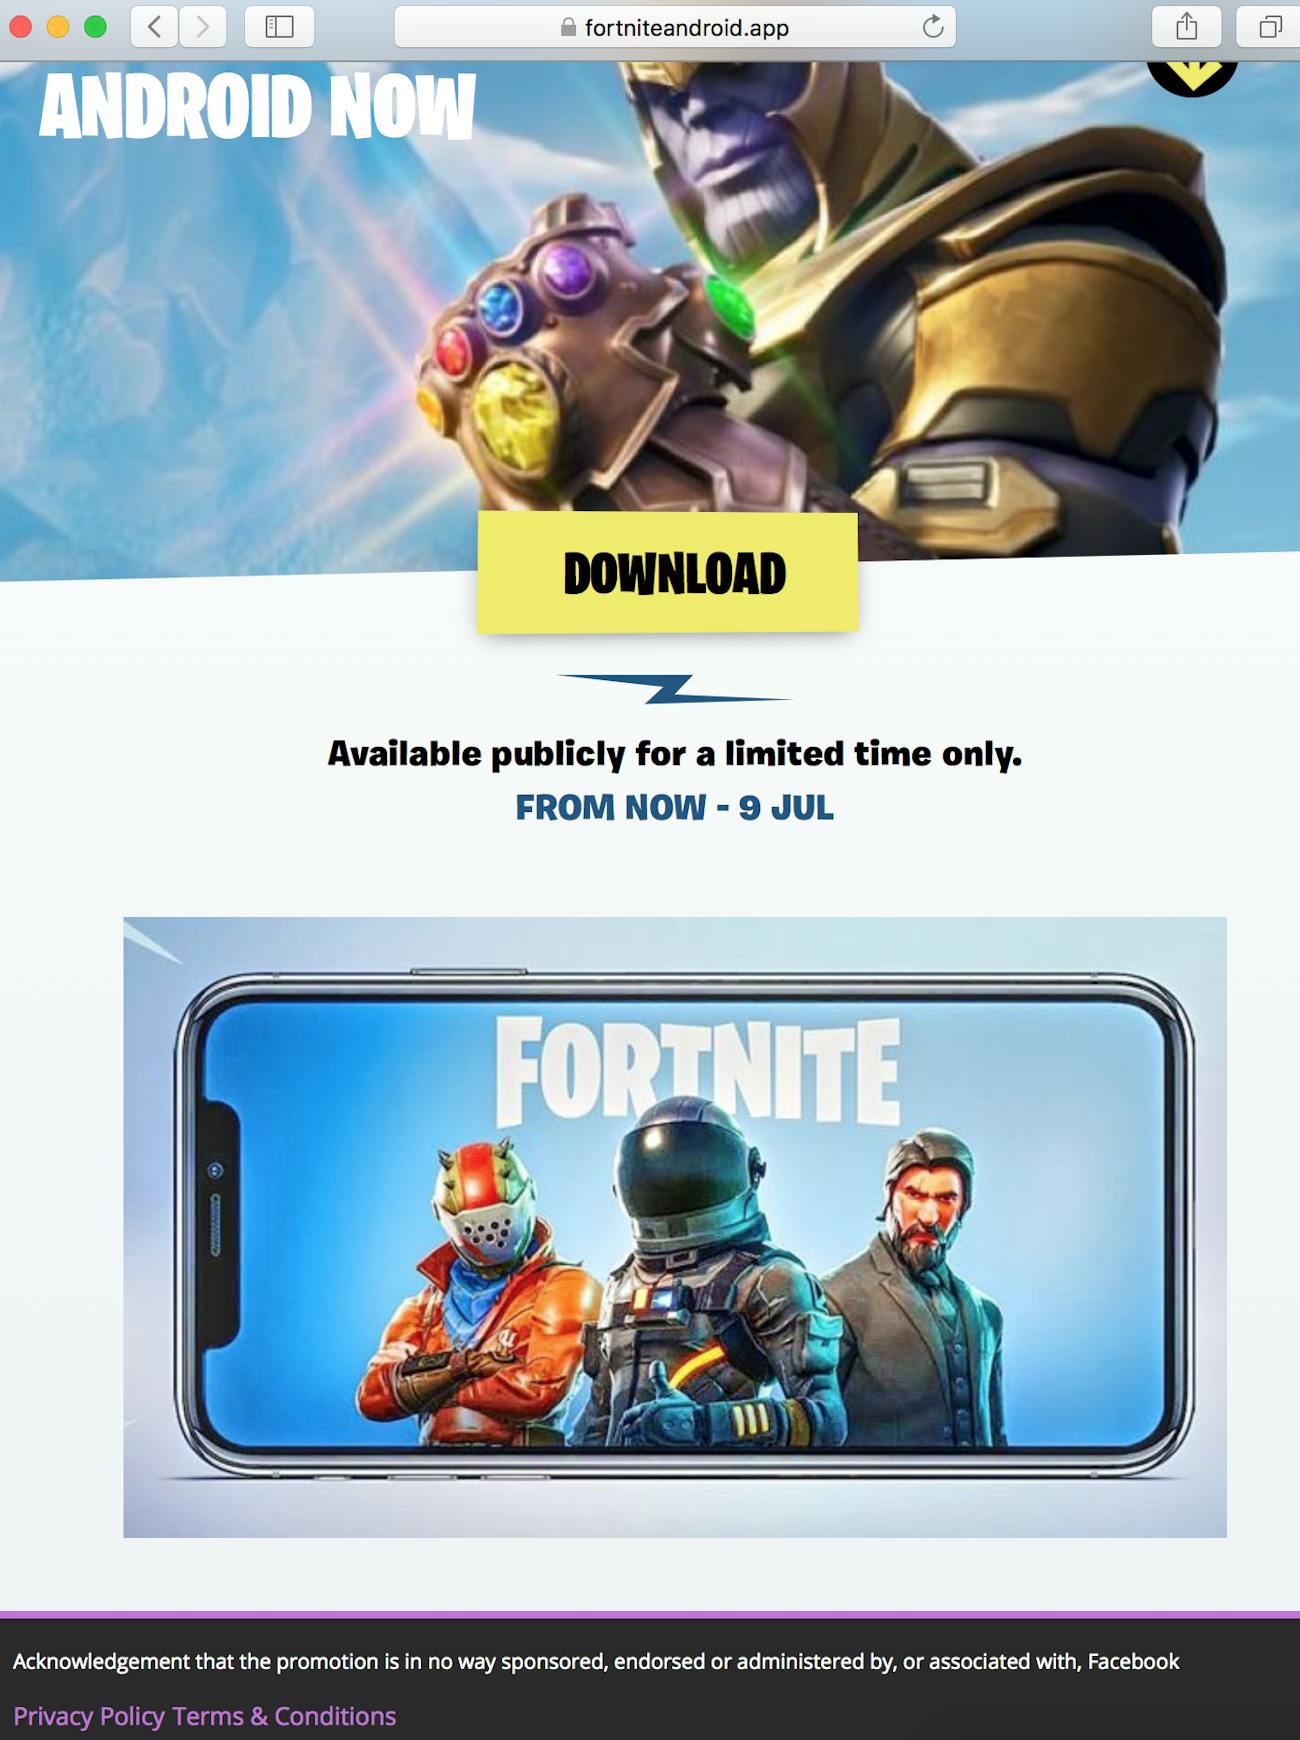 fake fortnite android site - fortnite android app download